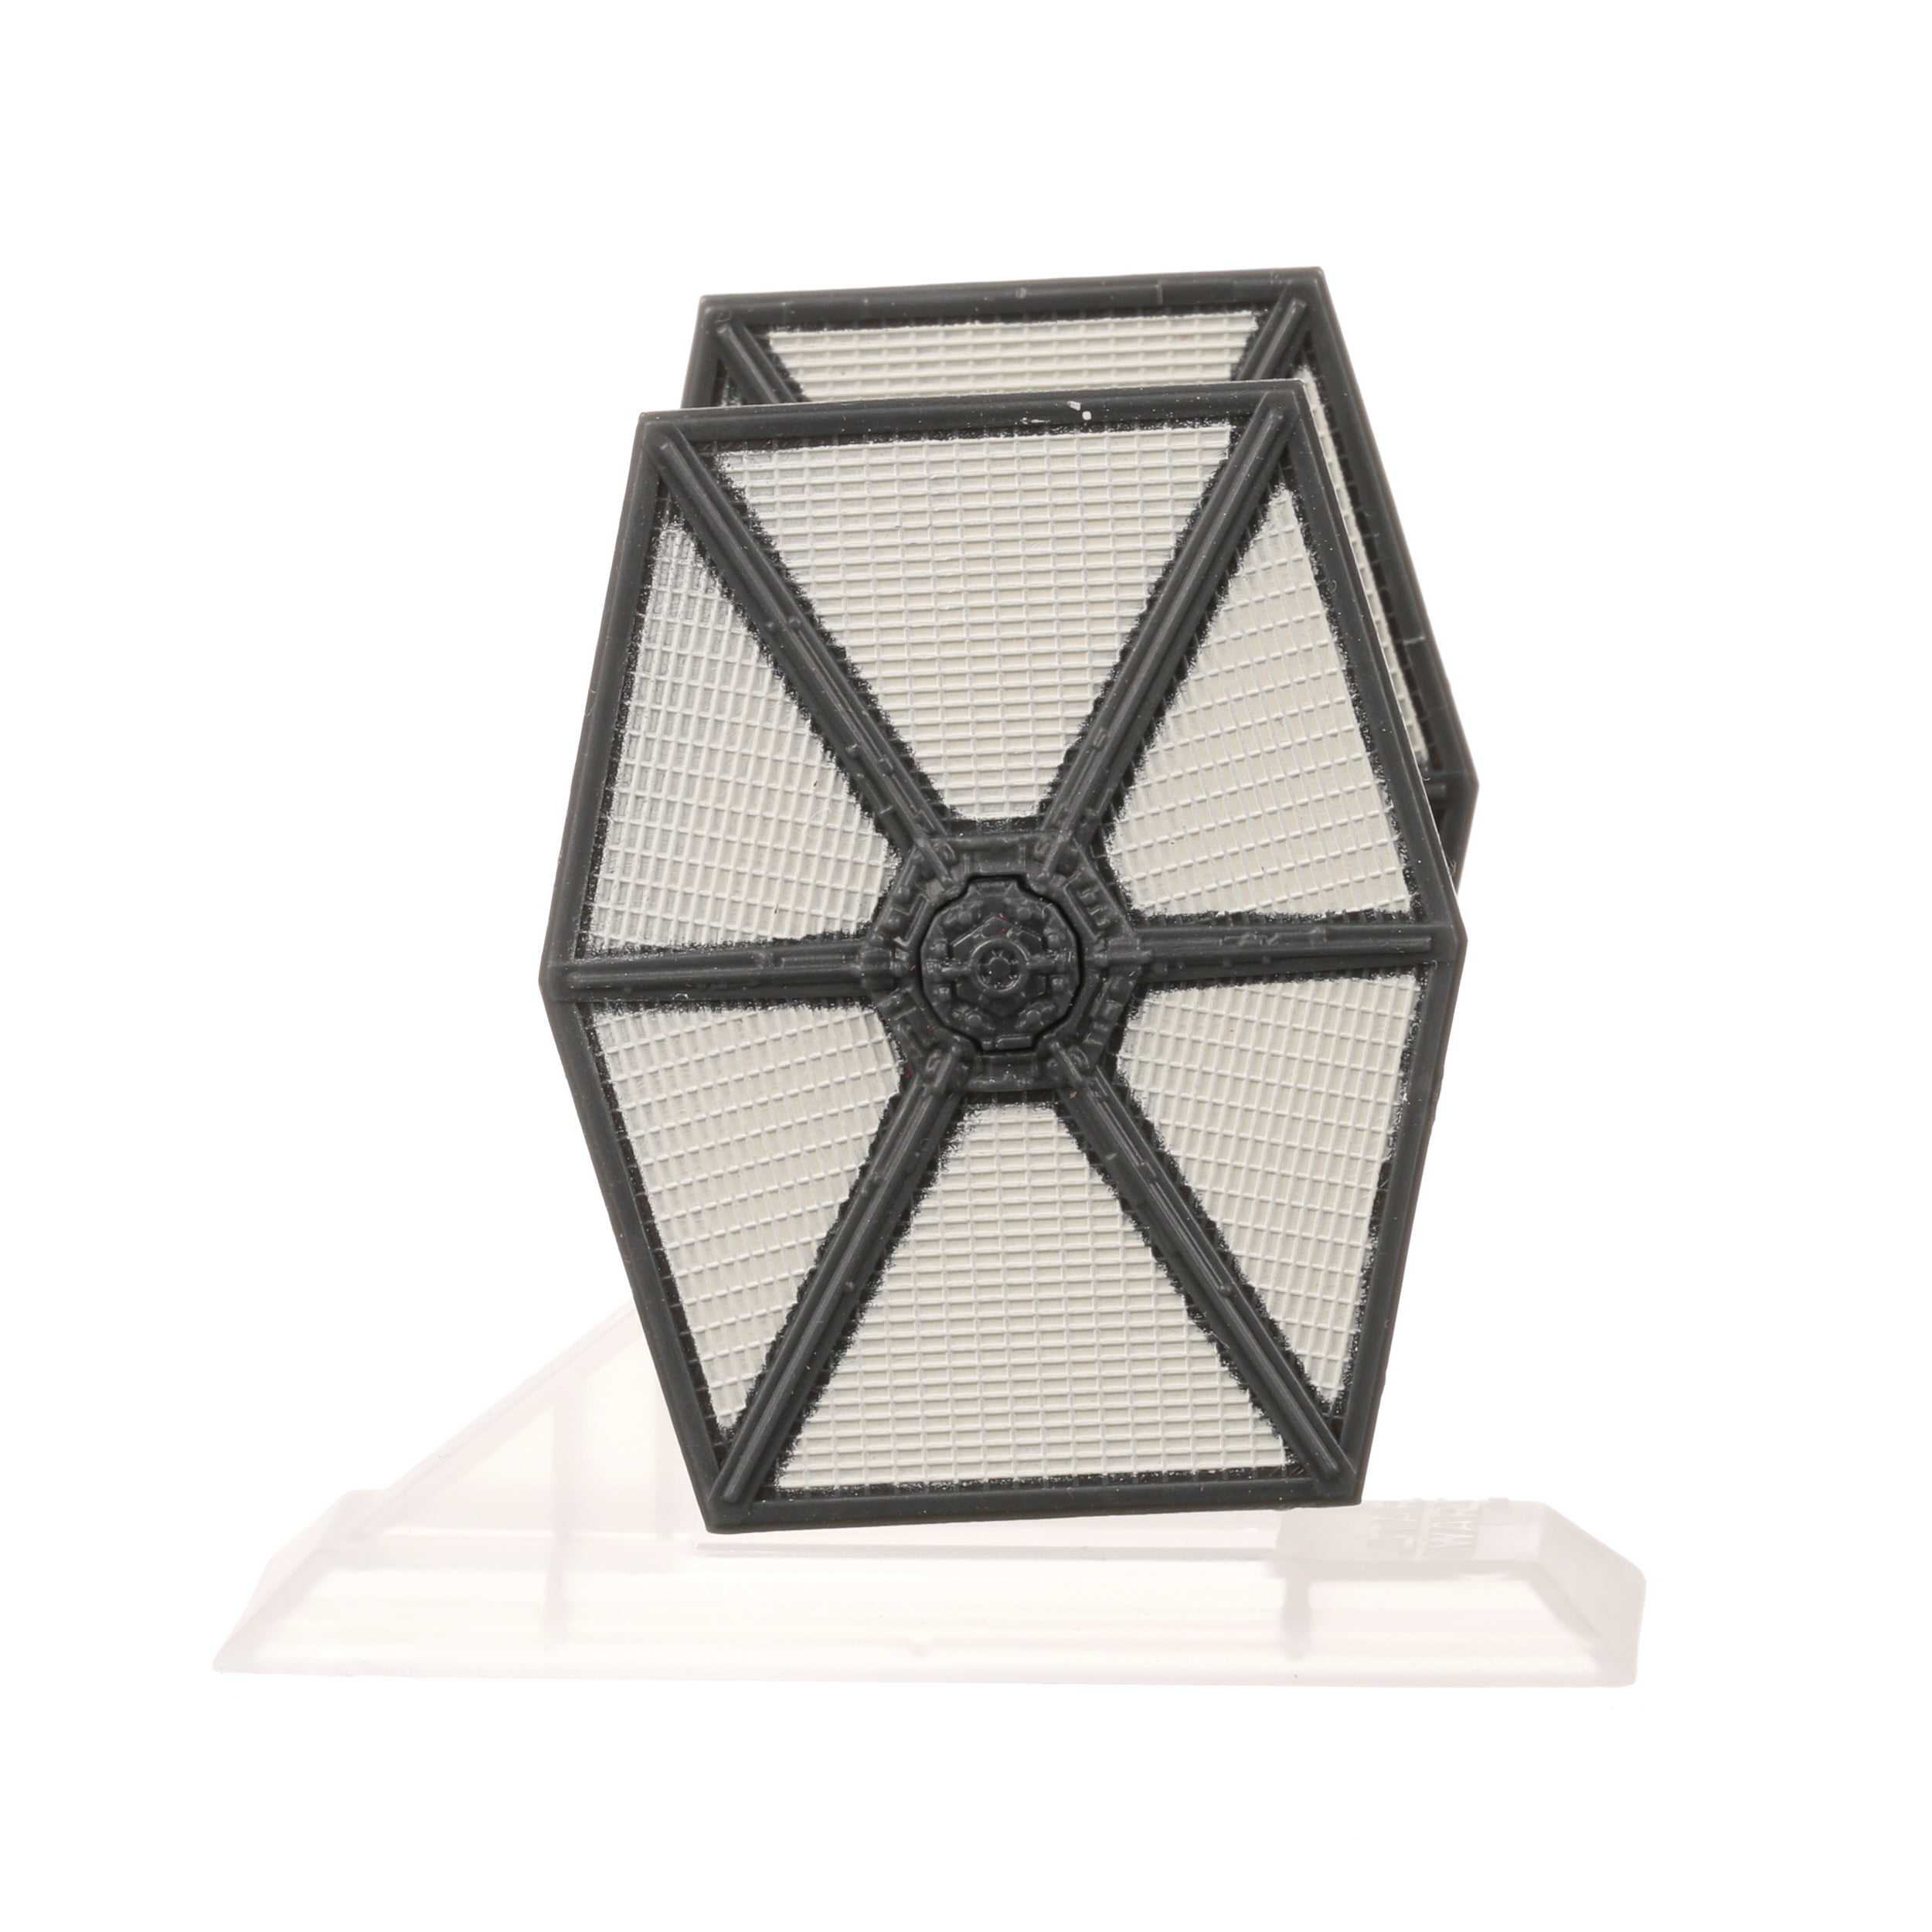 Details about   STAR WARS BLACK SERIES TITANIUM #13 FIRST ORDER TIE FIGHTER THE FORCE AWAKENS